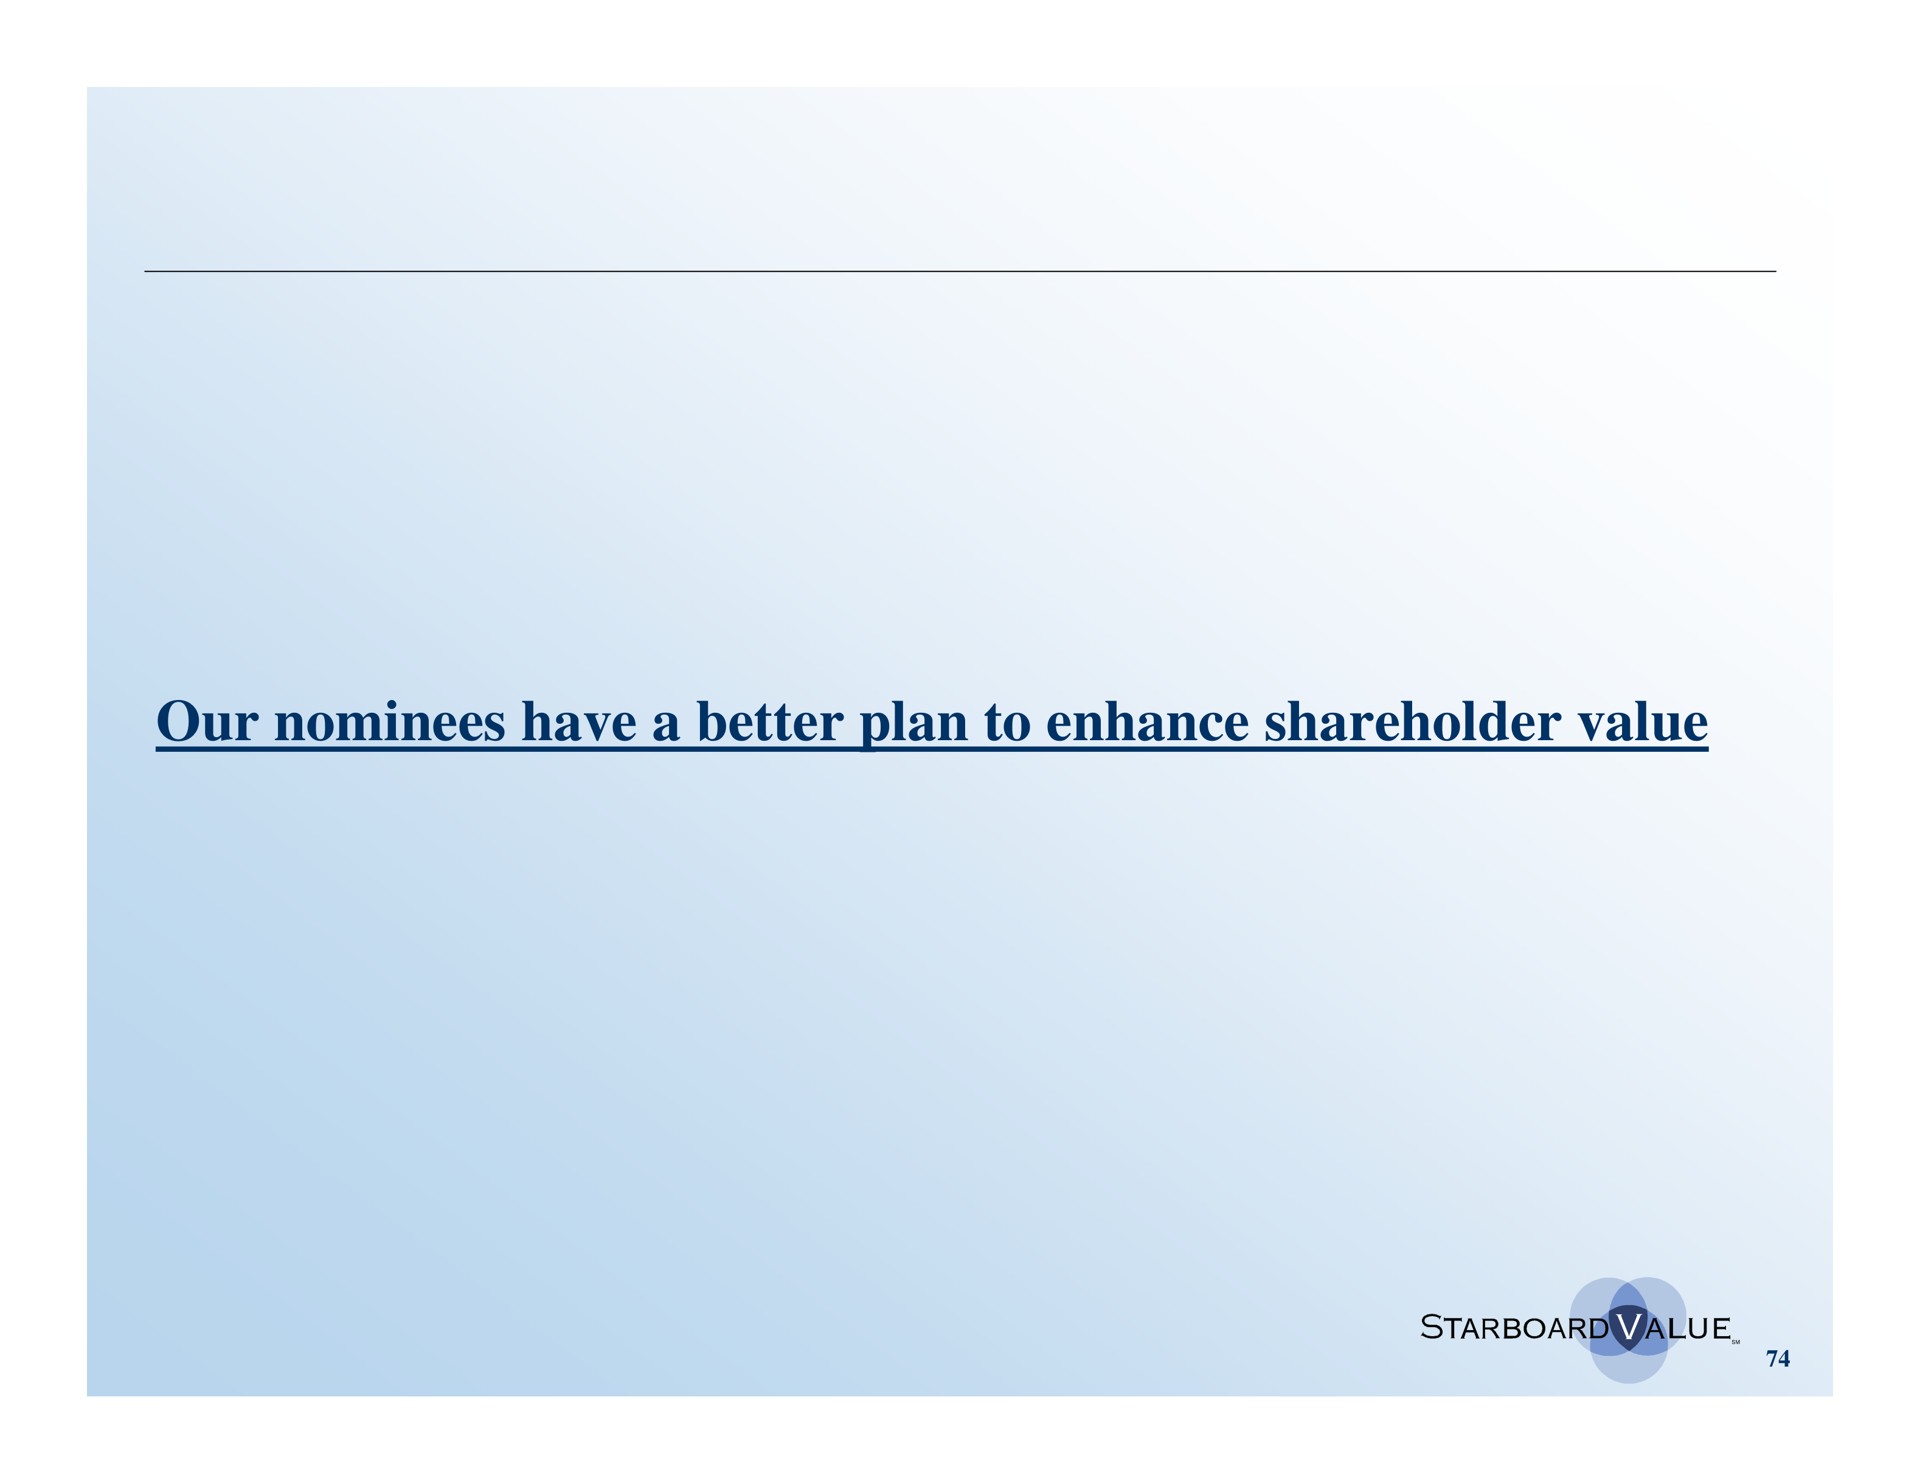 our nominees have a better plan to enhance shareholder value | Starboard Value